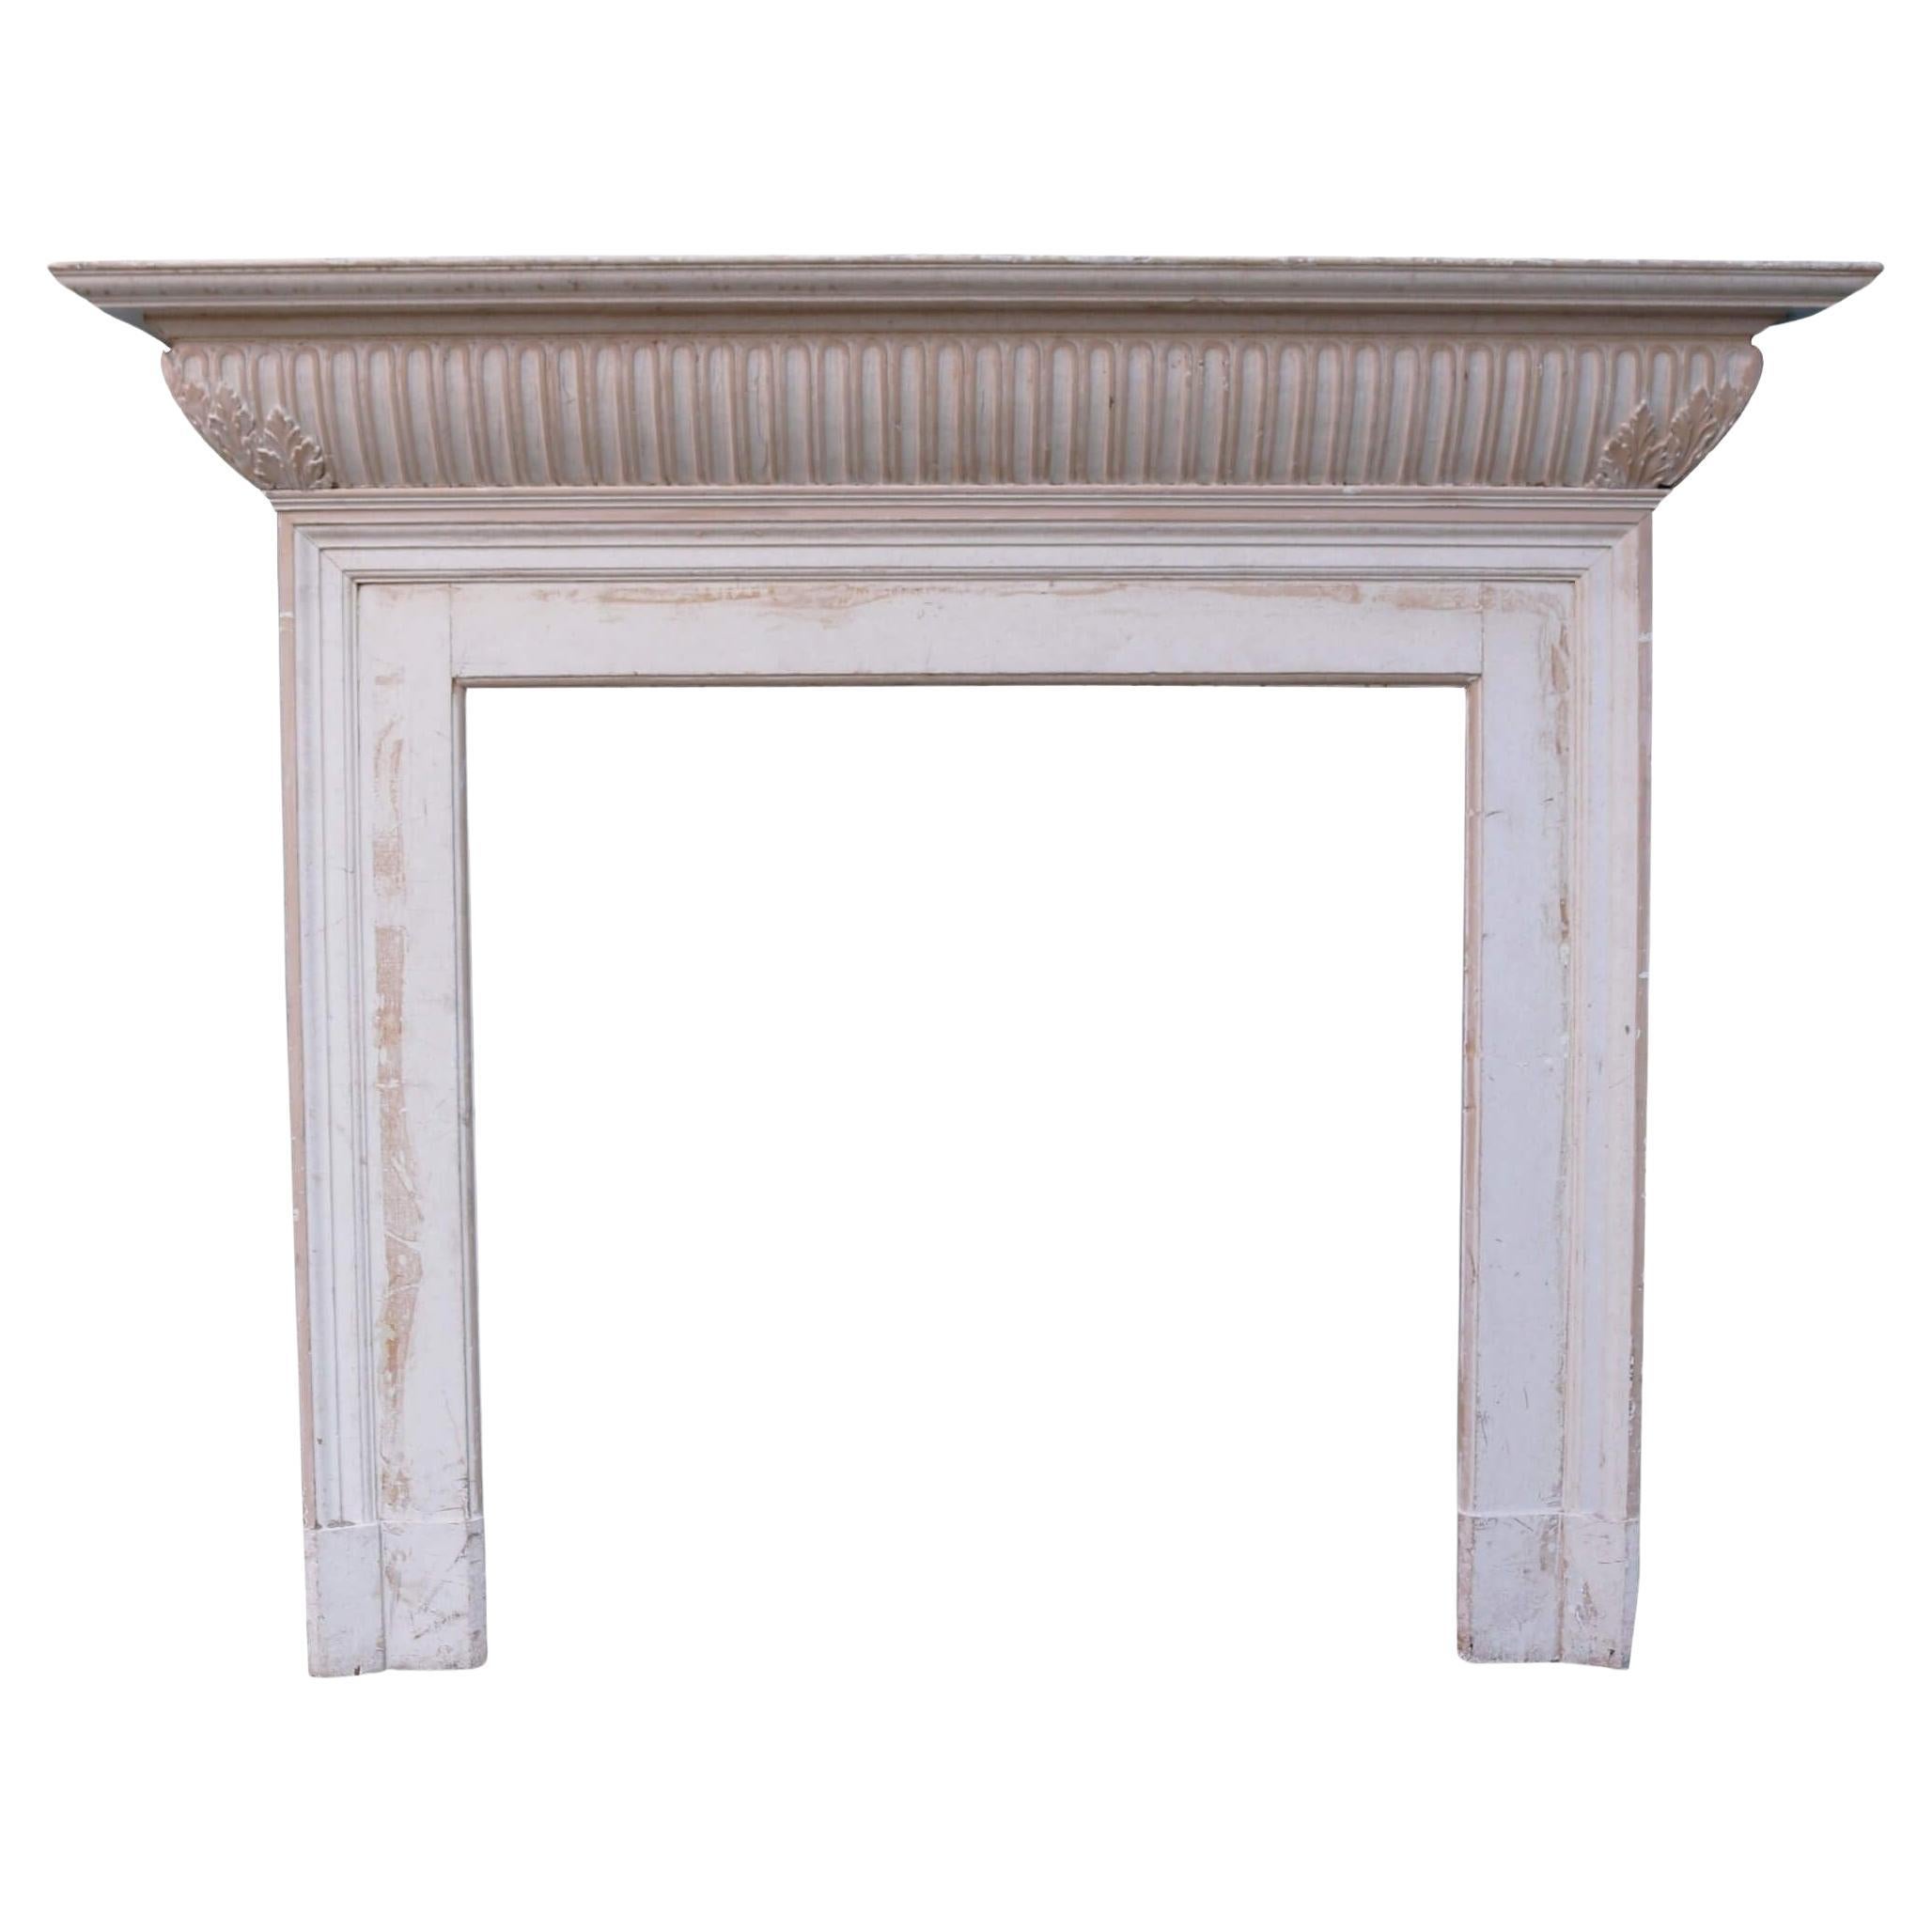 Late 19th Century Painted Antique Fire Mantel